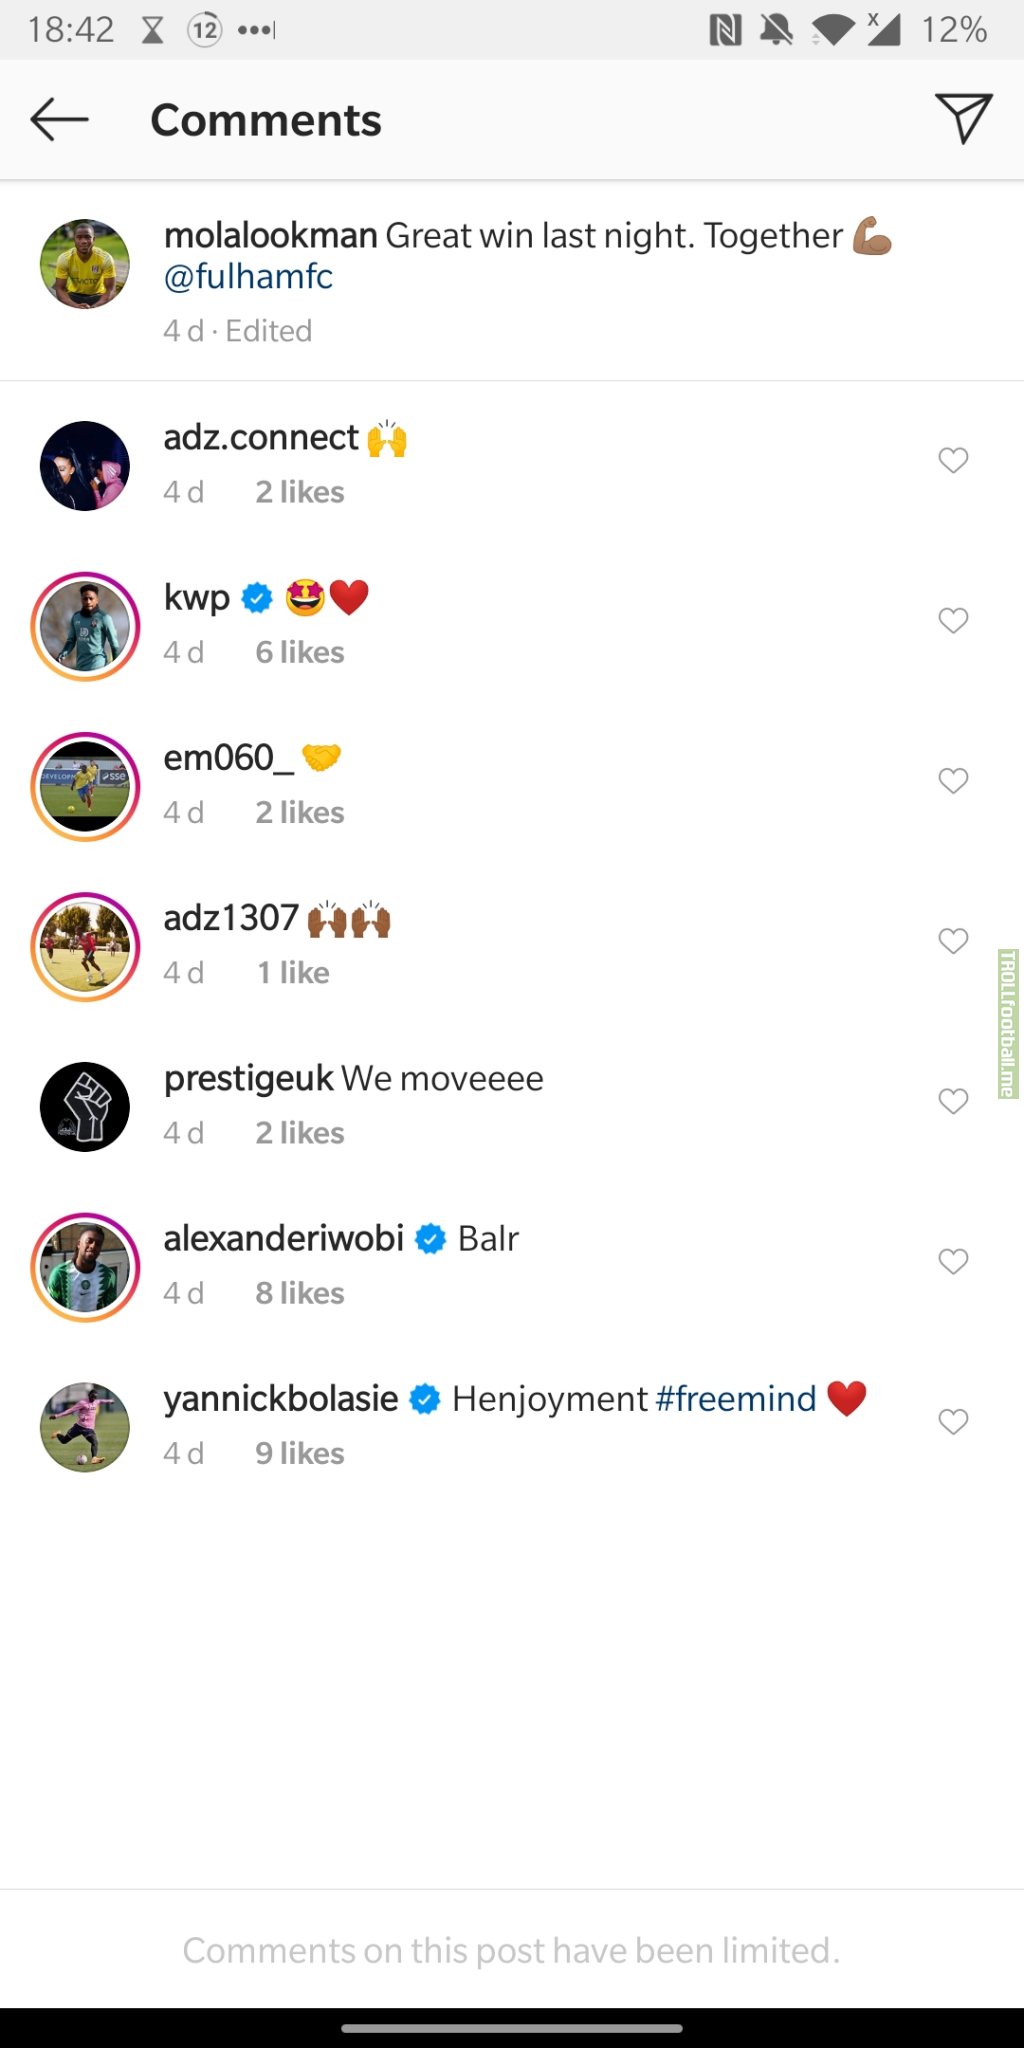 Lookma has already turned off comments on his Instagram